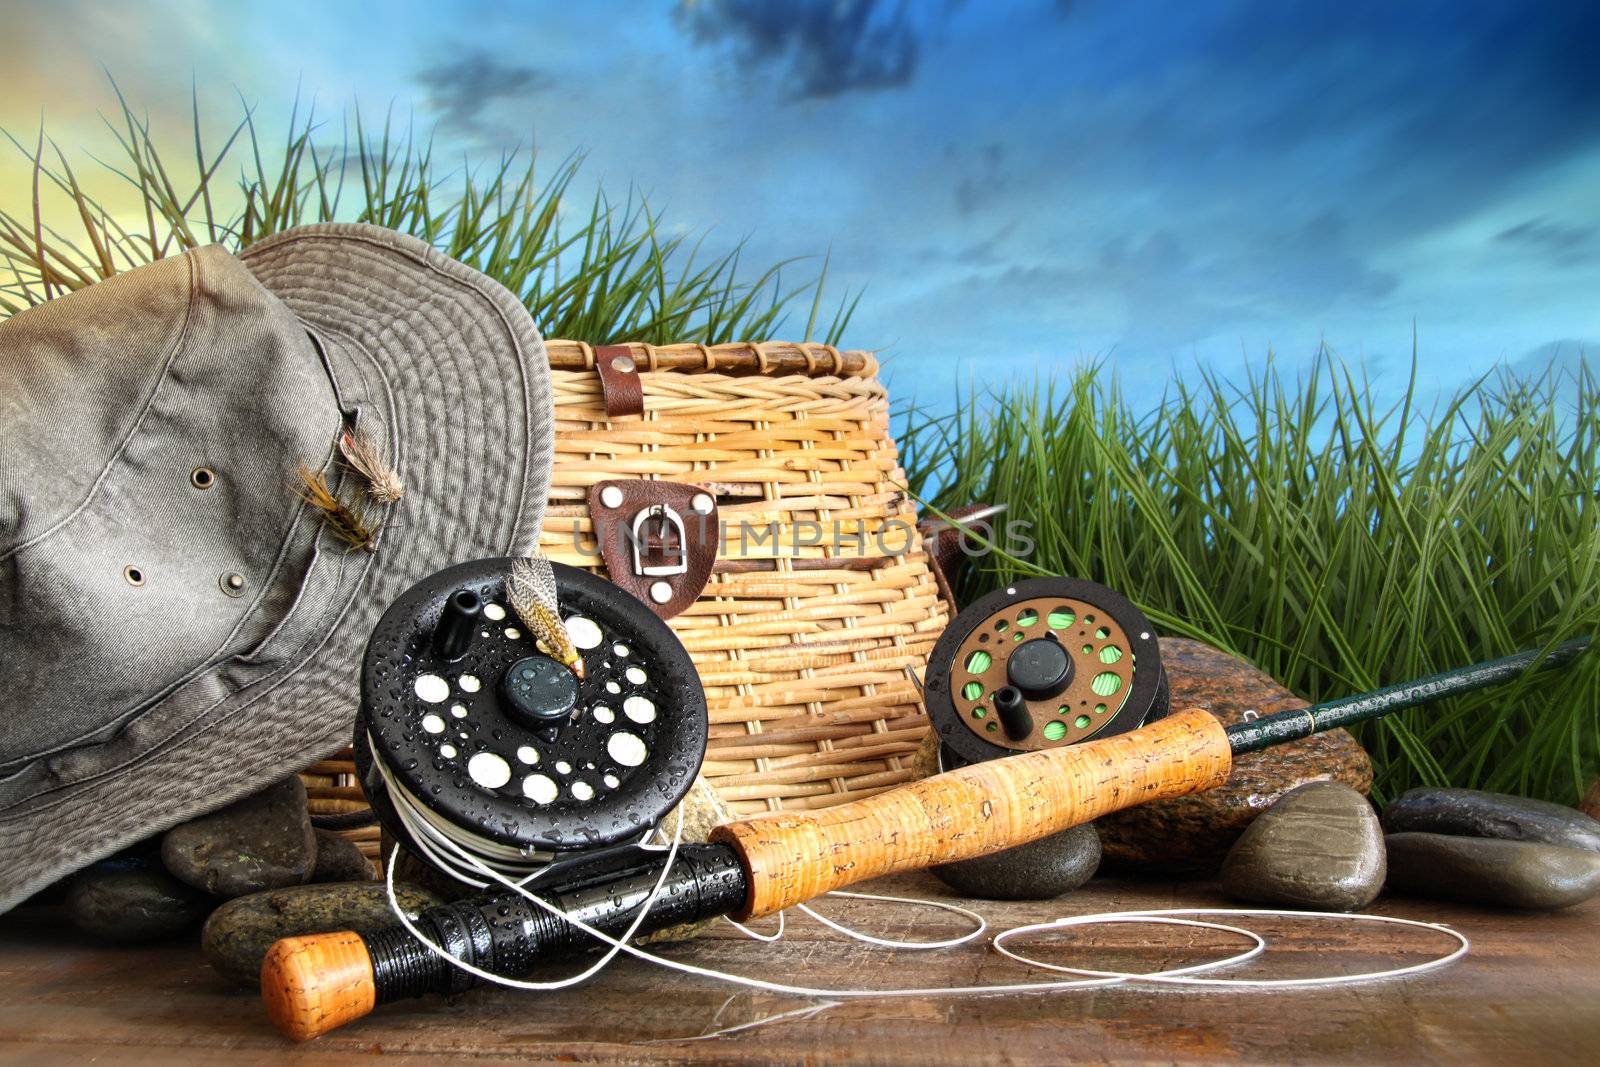 Fly fishing equipment with hat on wooden dock in grass